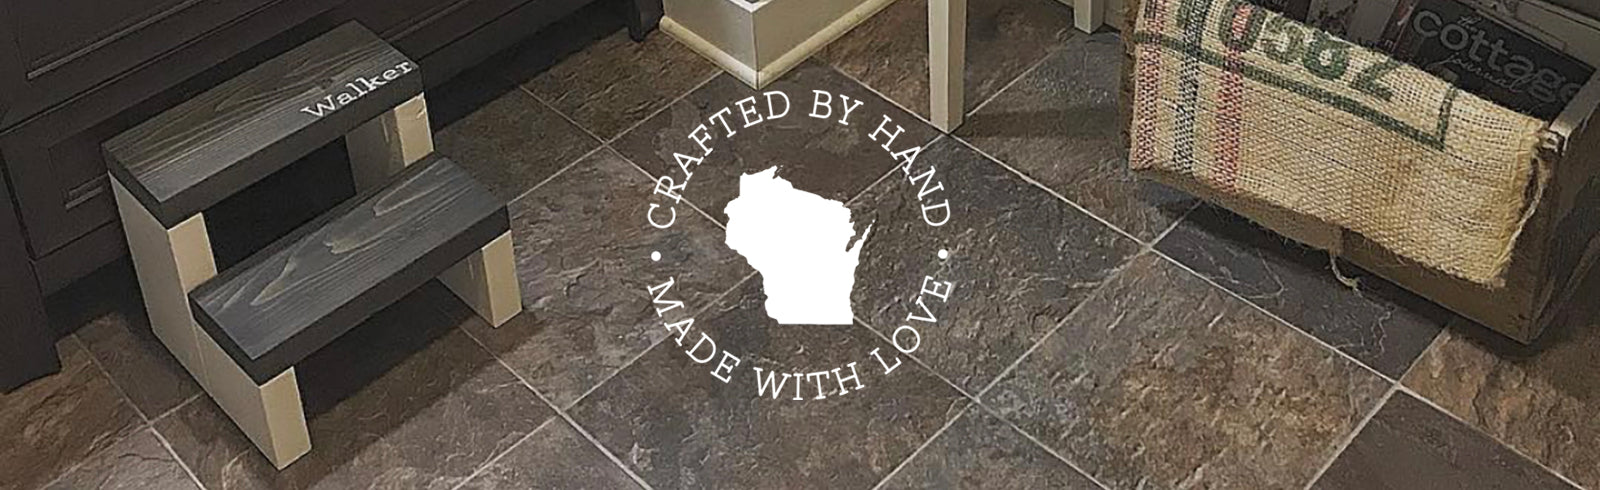 custom step stools crafted by hand in central Wisconsin